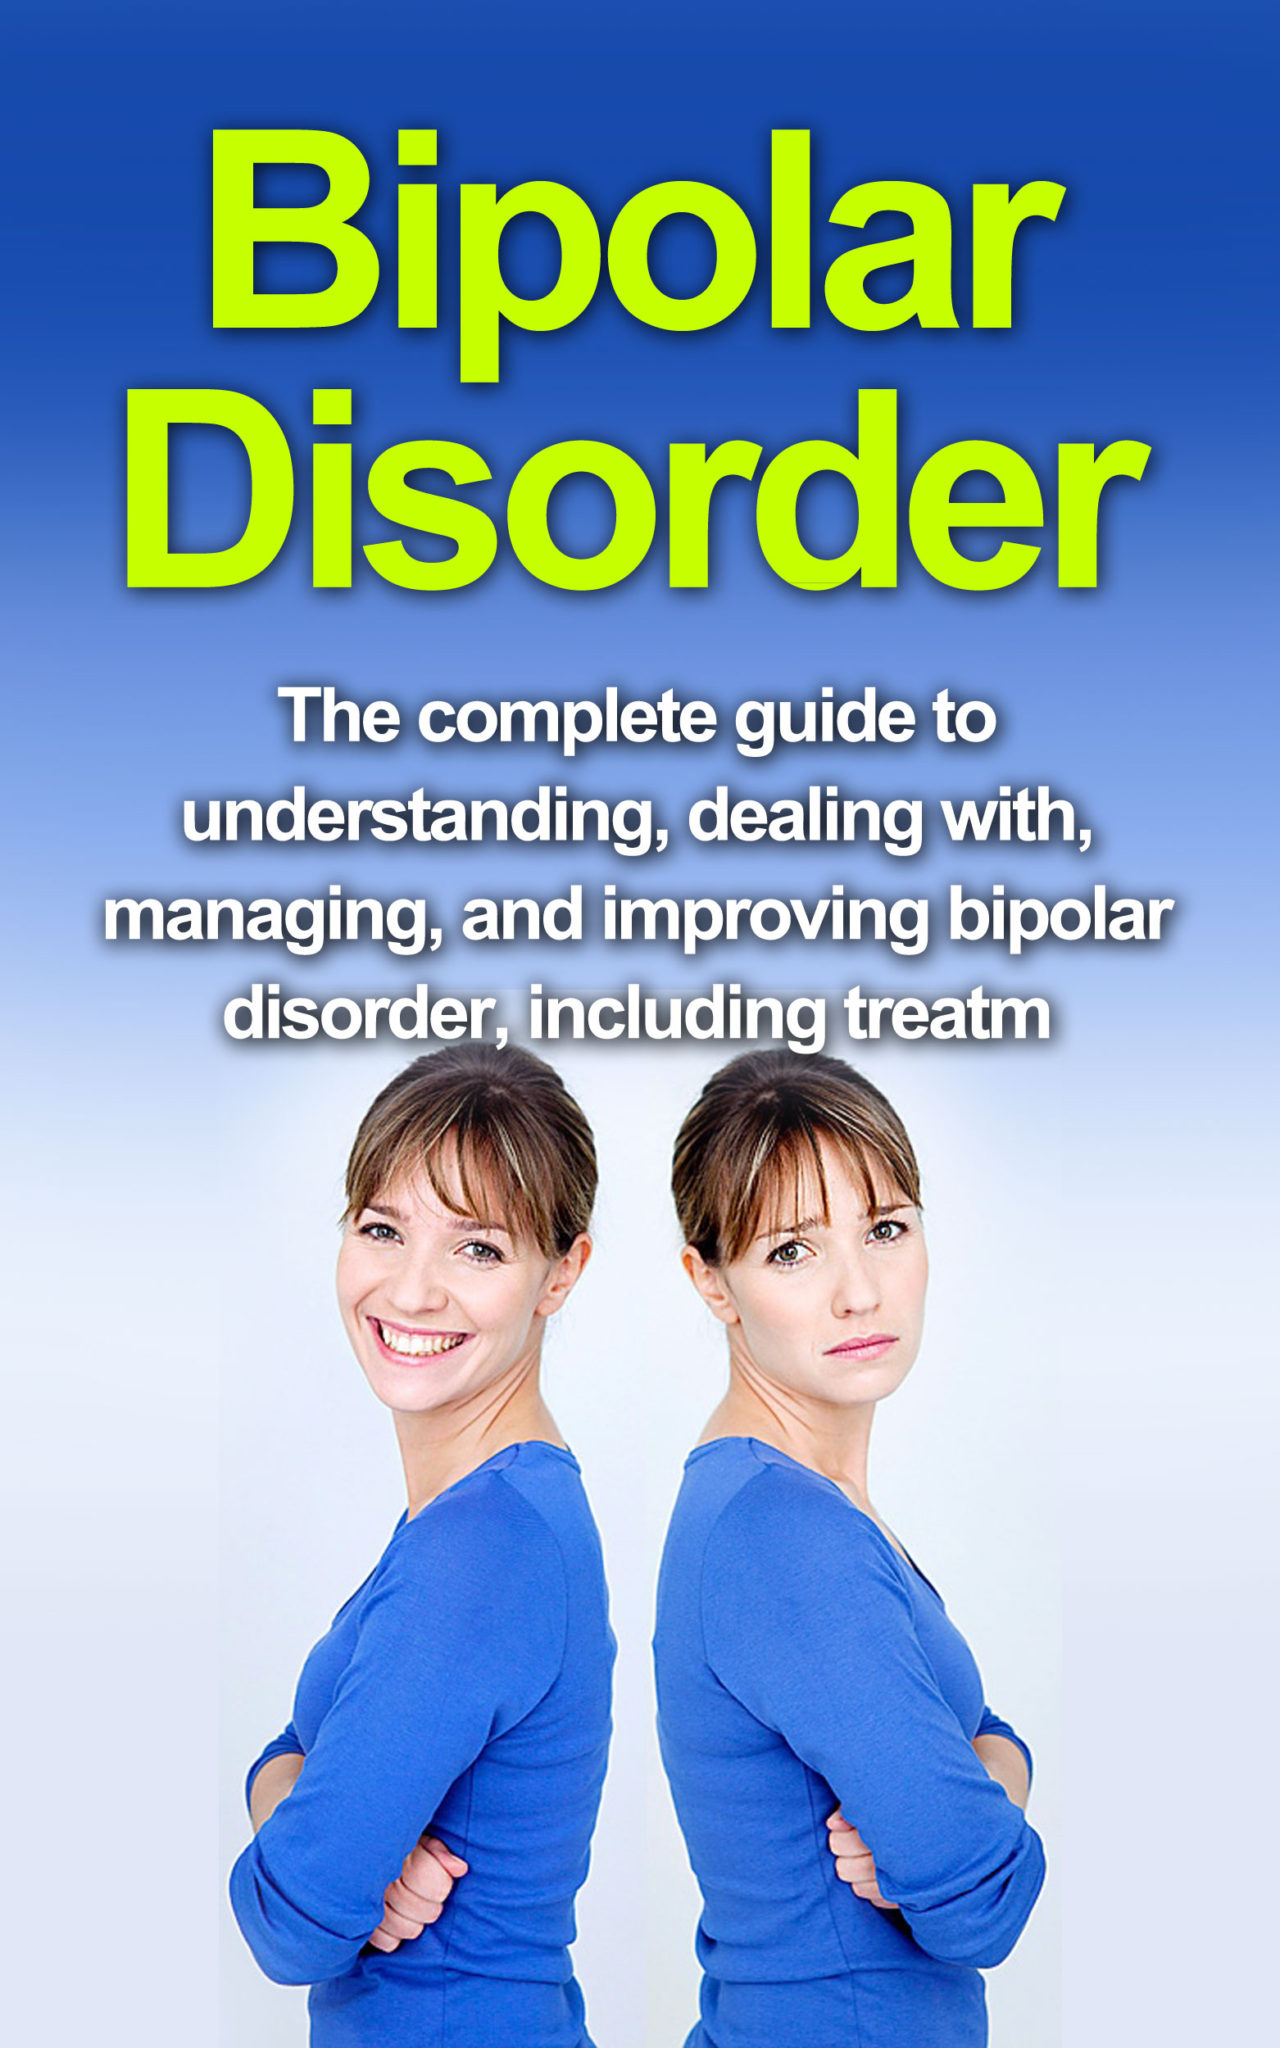 FREE: Bipolar Disorder: The complete guide to understanding, dealing with, managing, and improving bipolar disorder, including treatment options and bipolar disorder remedies! by Alyssa Stone